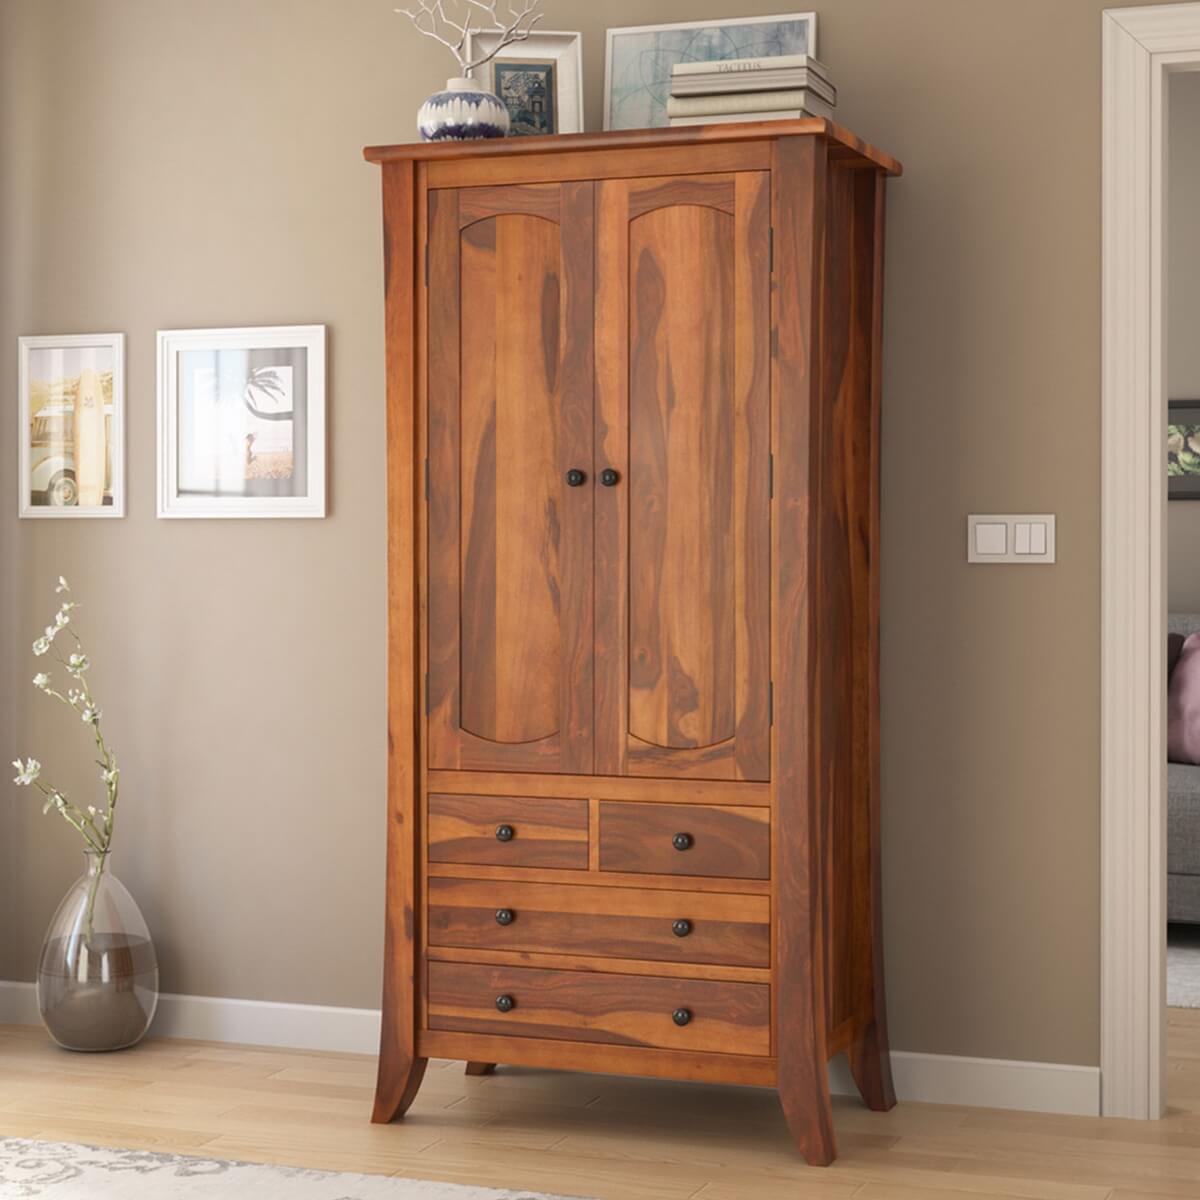 Natural Woven Rattan Bedroom Clothing Armoire with Hidden 2 Doors and  Drawers Wardrobe